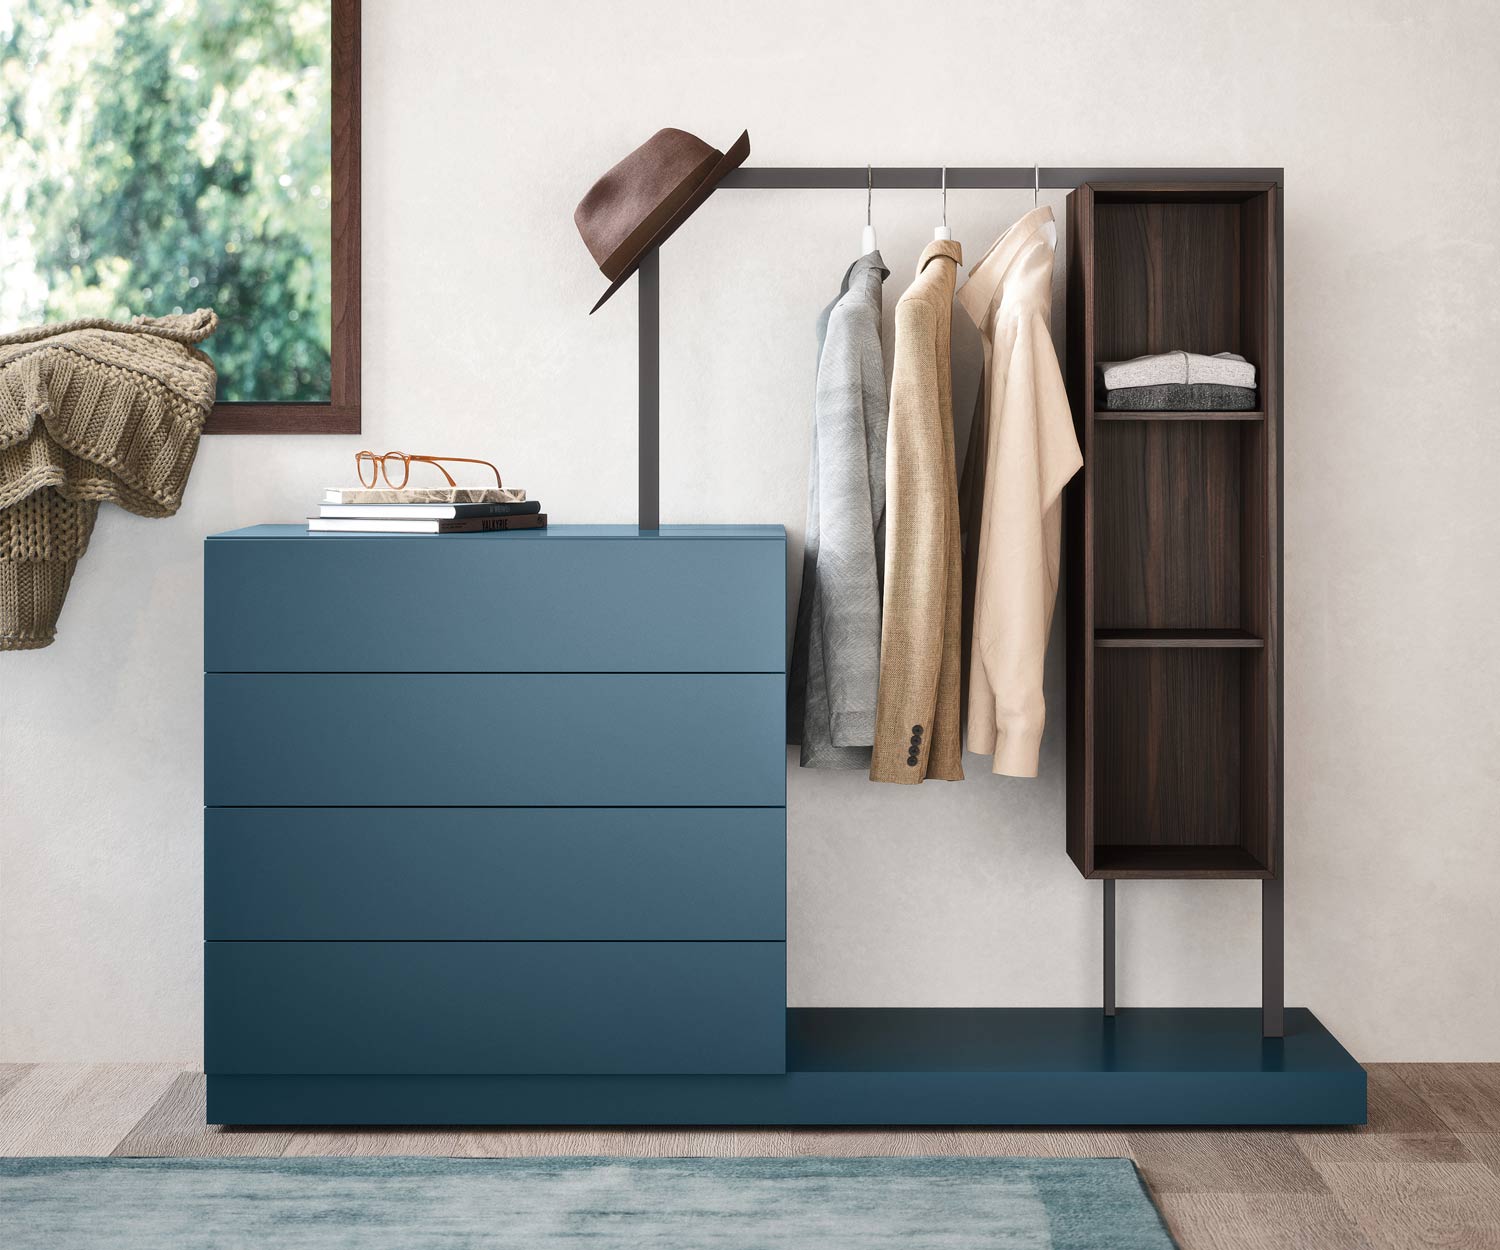 High-quality Easy 4 chest of drawers from Novamobili with wardrobe and shelving unit